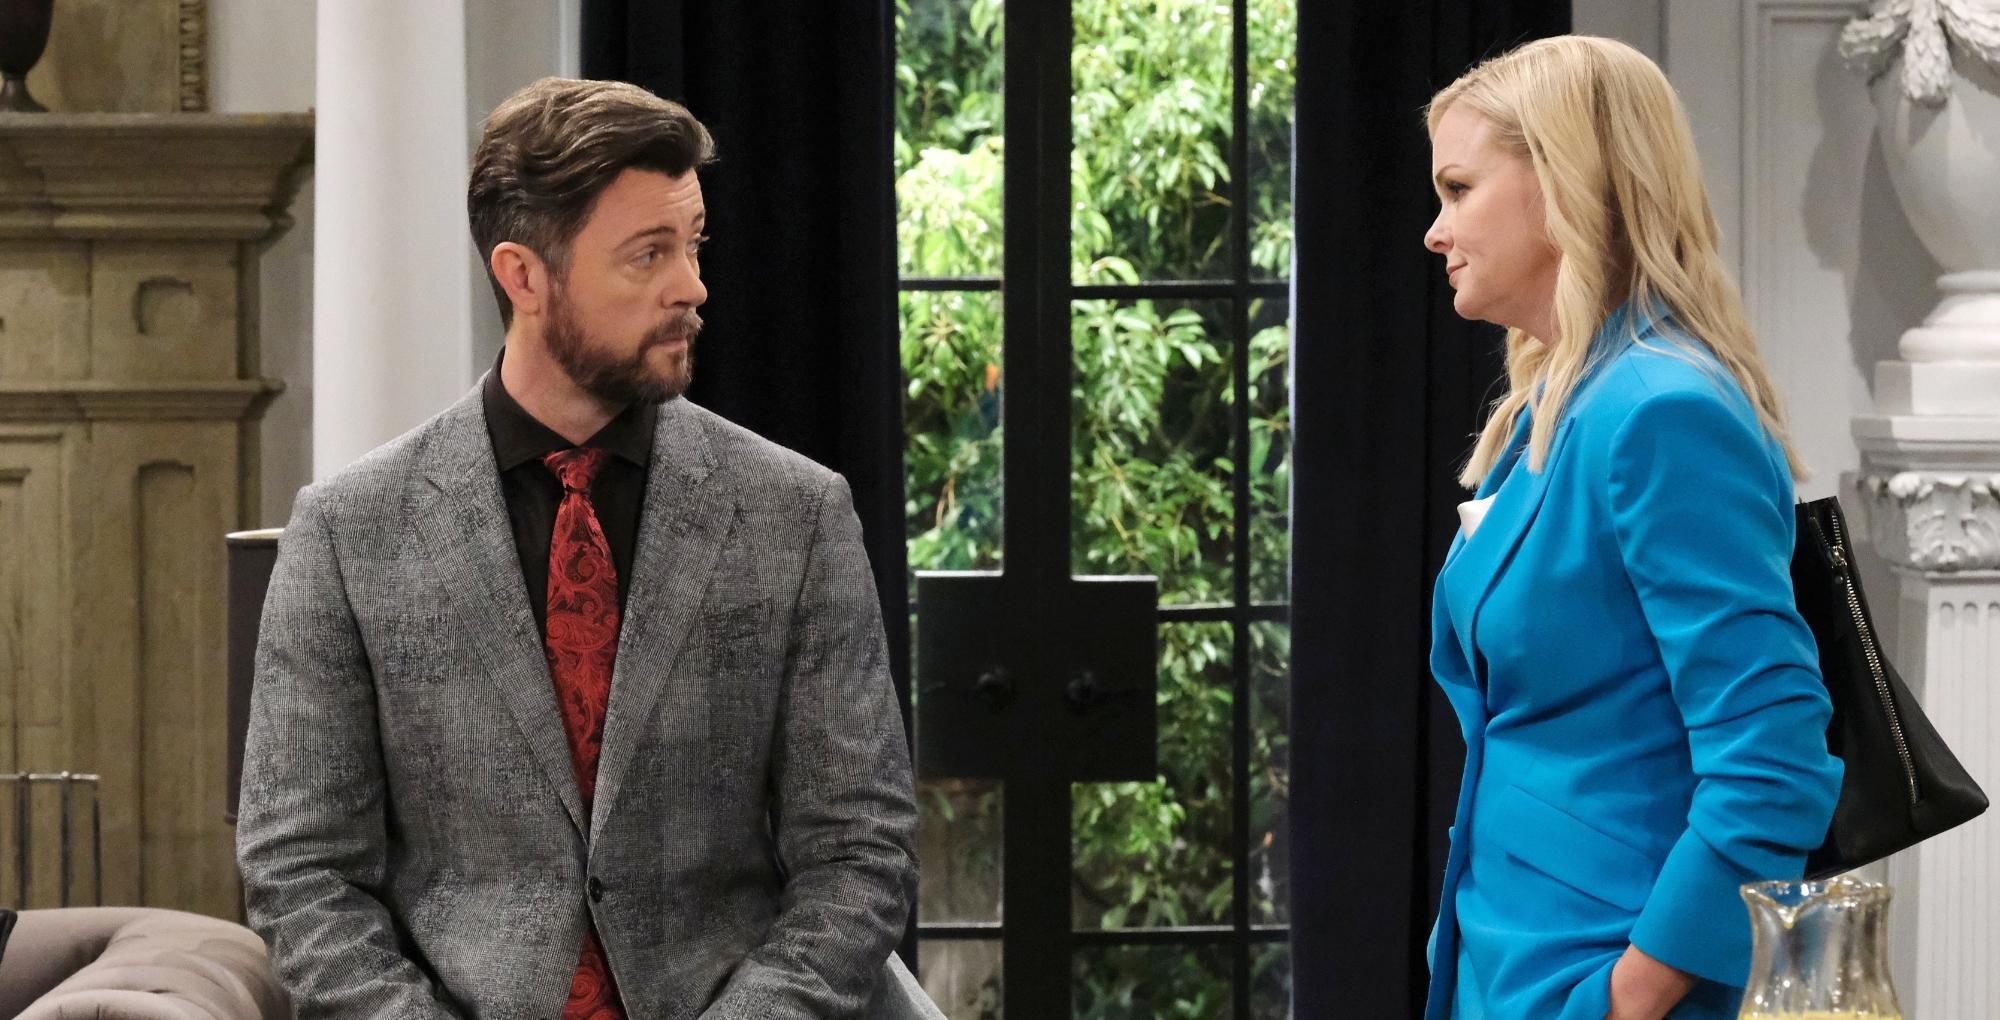 days of our lives spoilers for may 1, 2023, have ej on belle's last nerve.